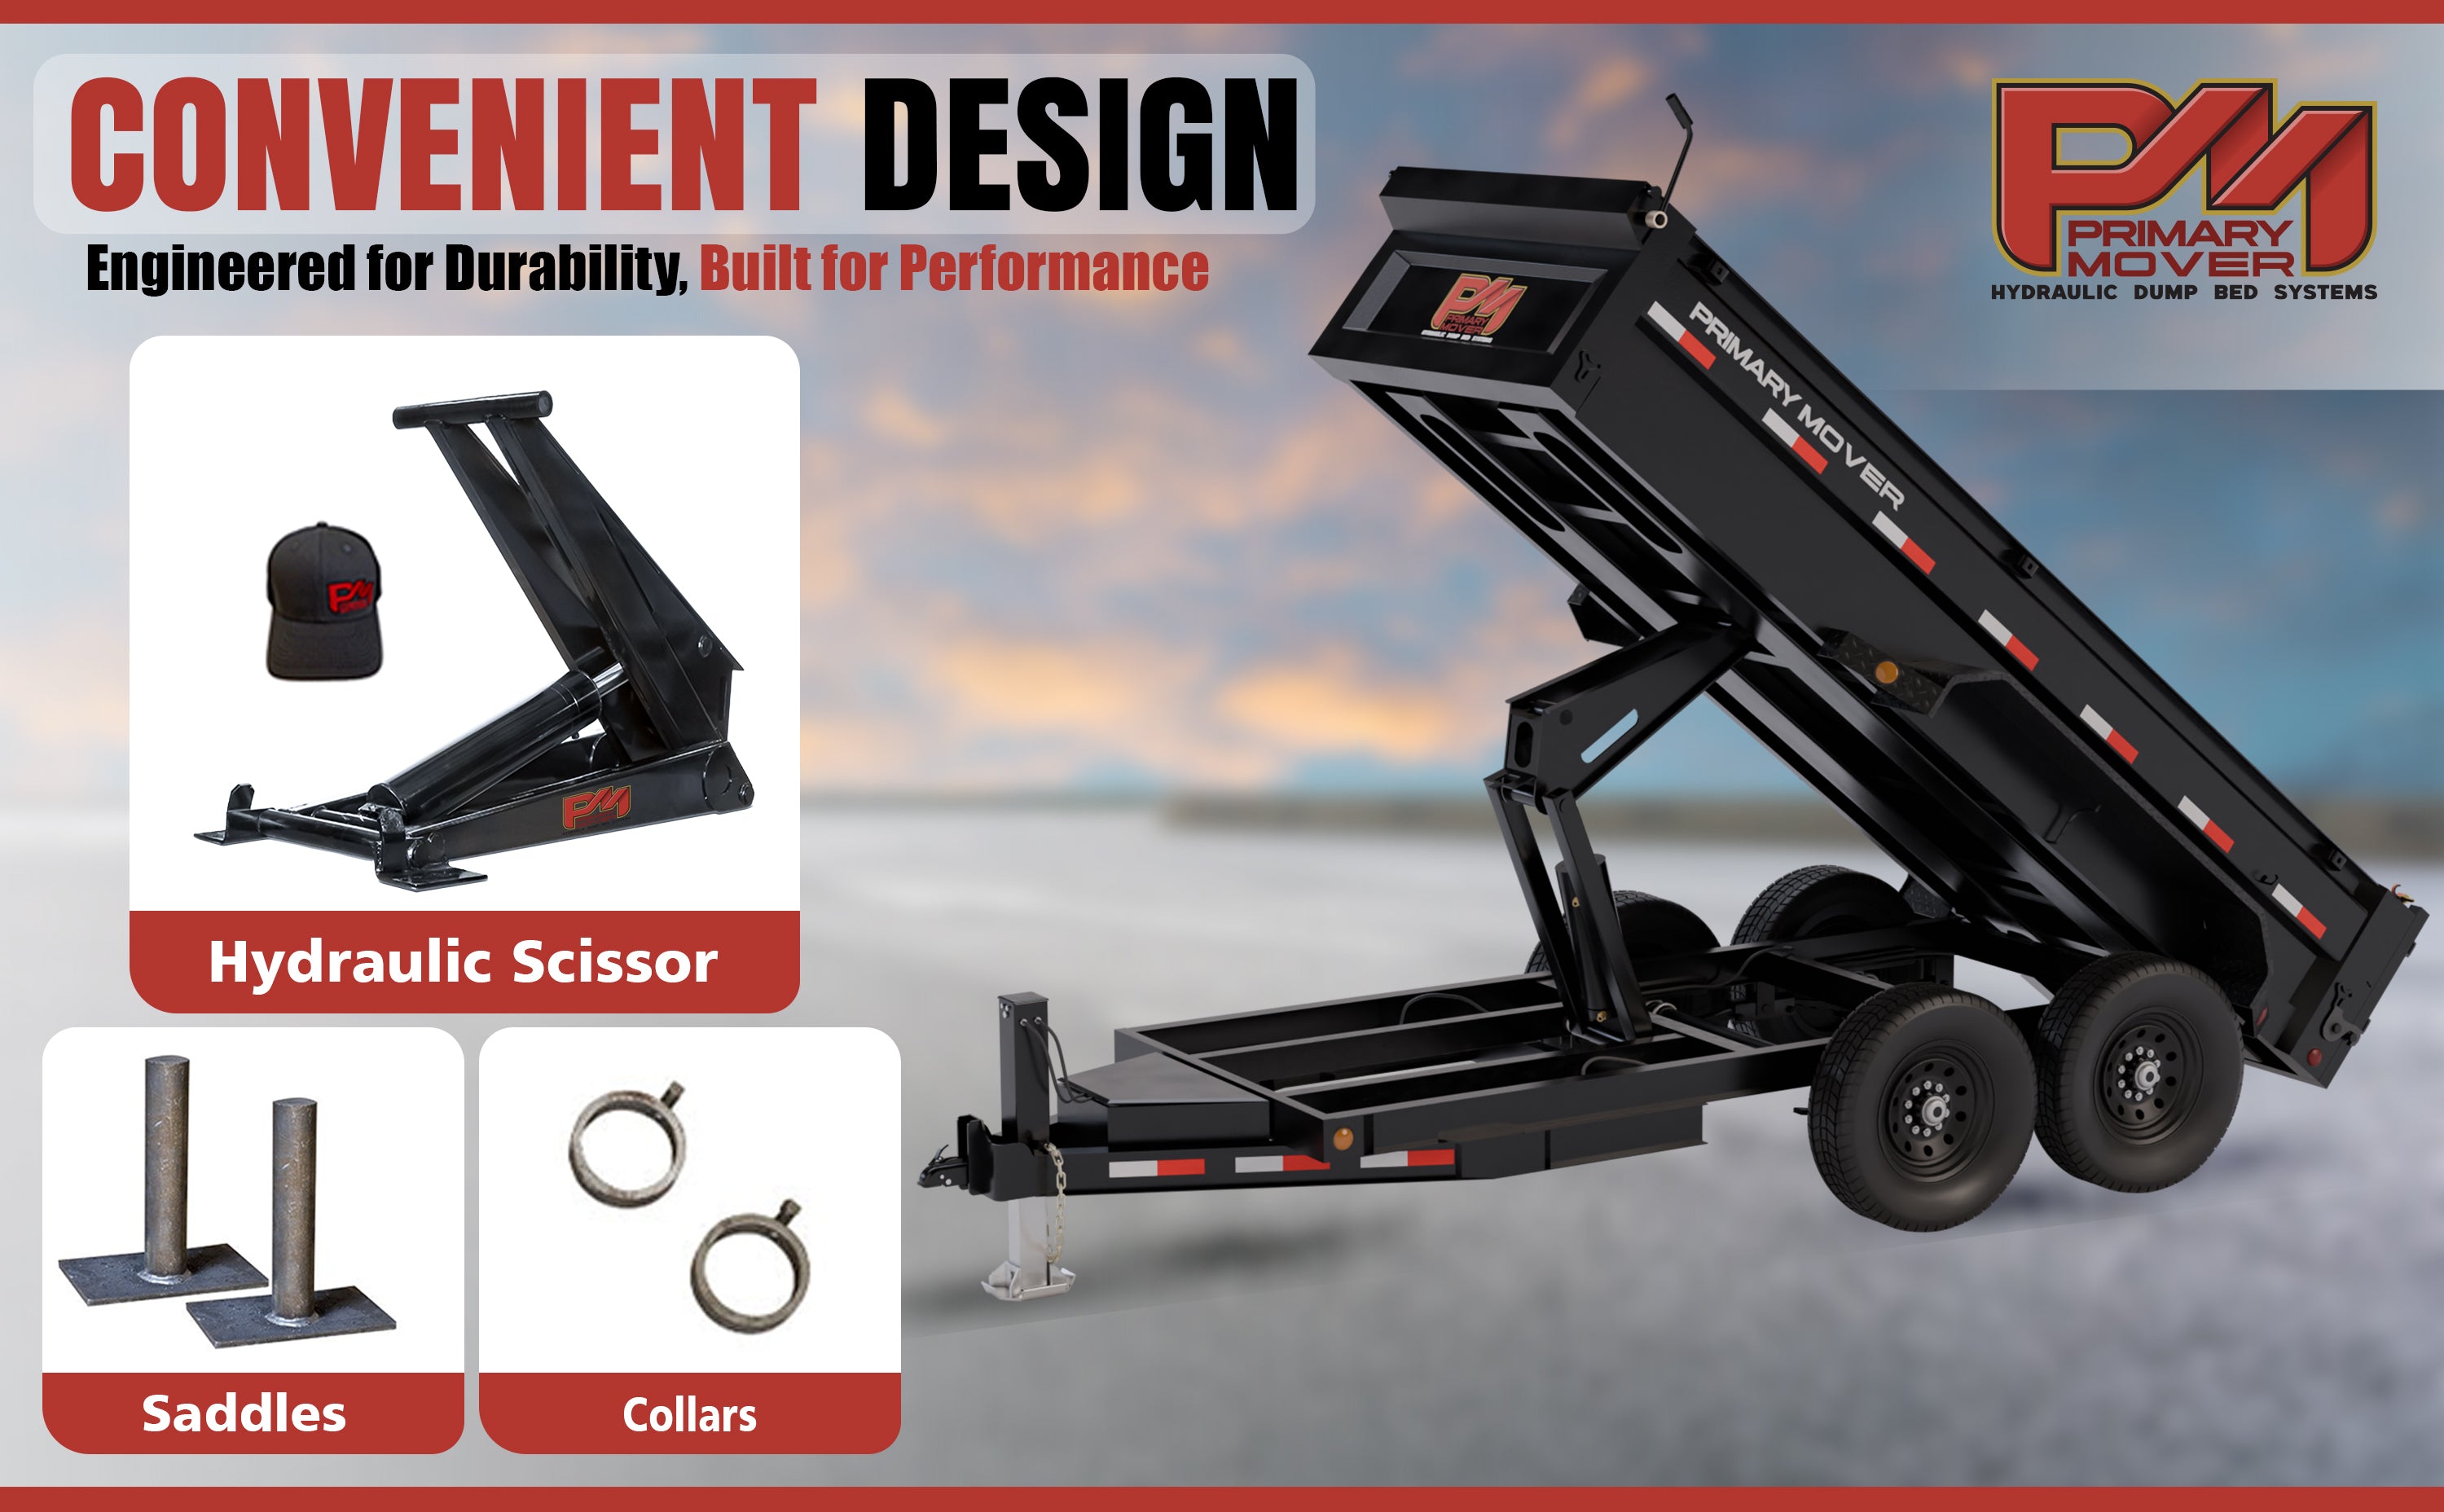 Hydraulic Scissor Hoist Kit - 12 Ton Capacity - Fits 16-20' Dump Body | PF-625. Image: Trailer with lift, tire close-ups, logo details. Reliable, durable hoist for dump trailers. Includes cylinder, mounting brackets, hydraulic pump, safety features.